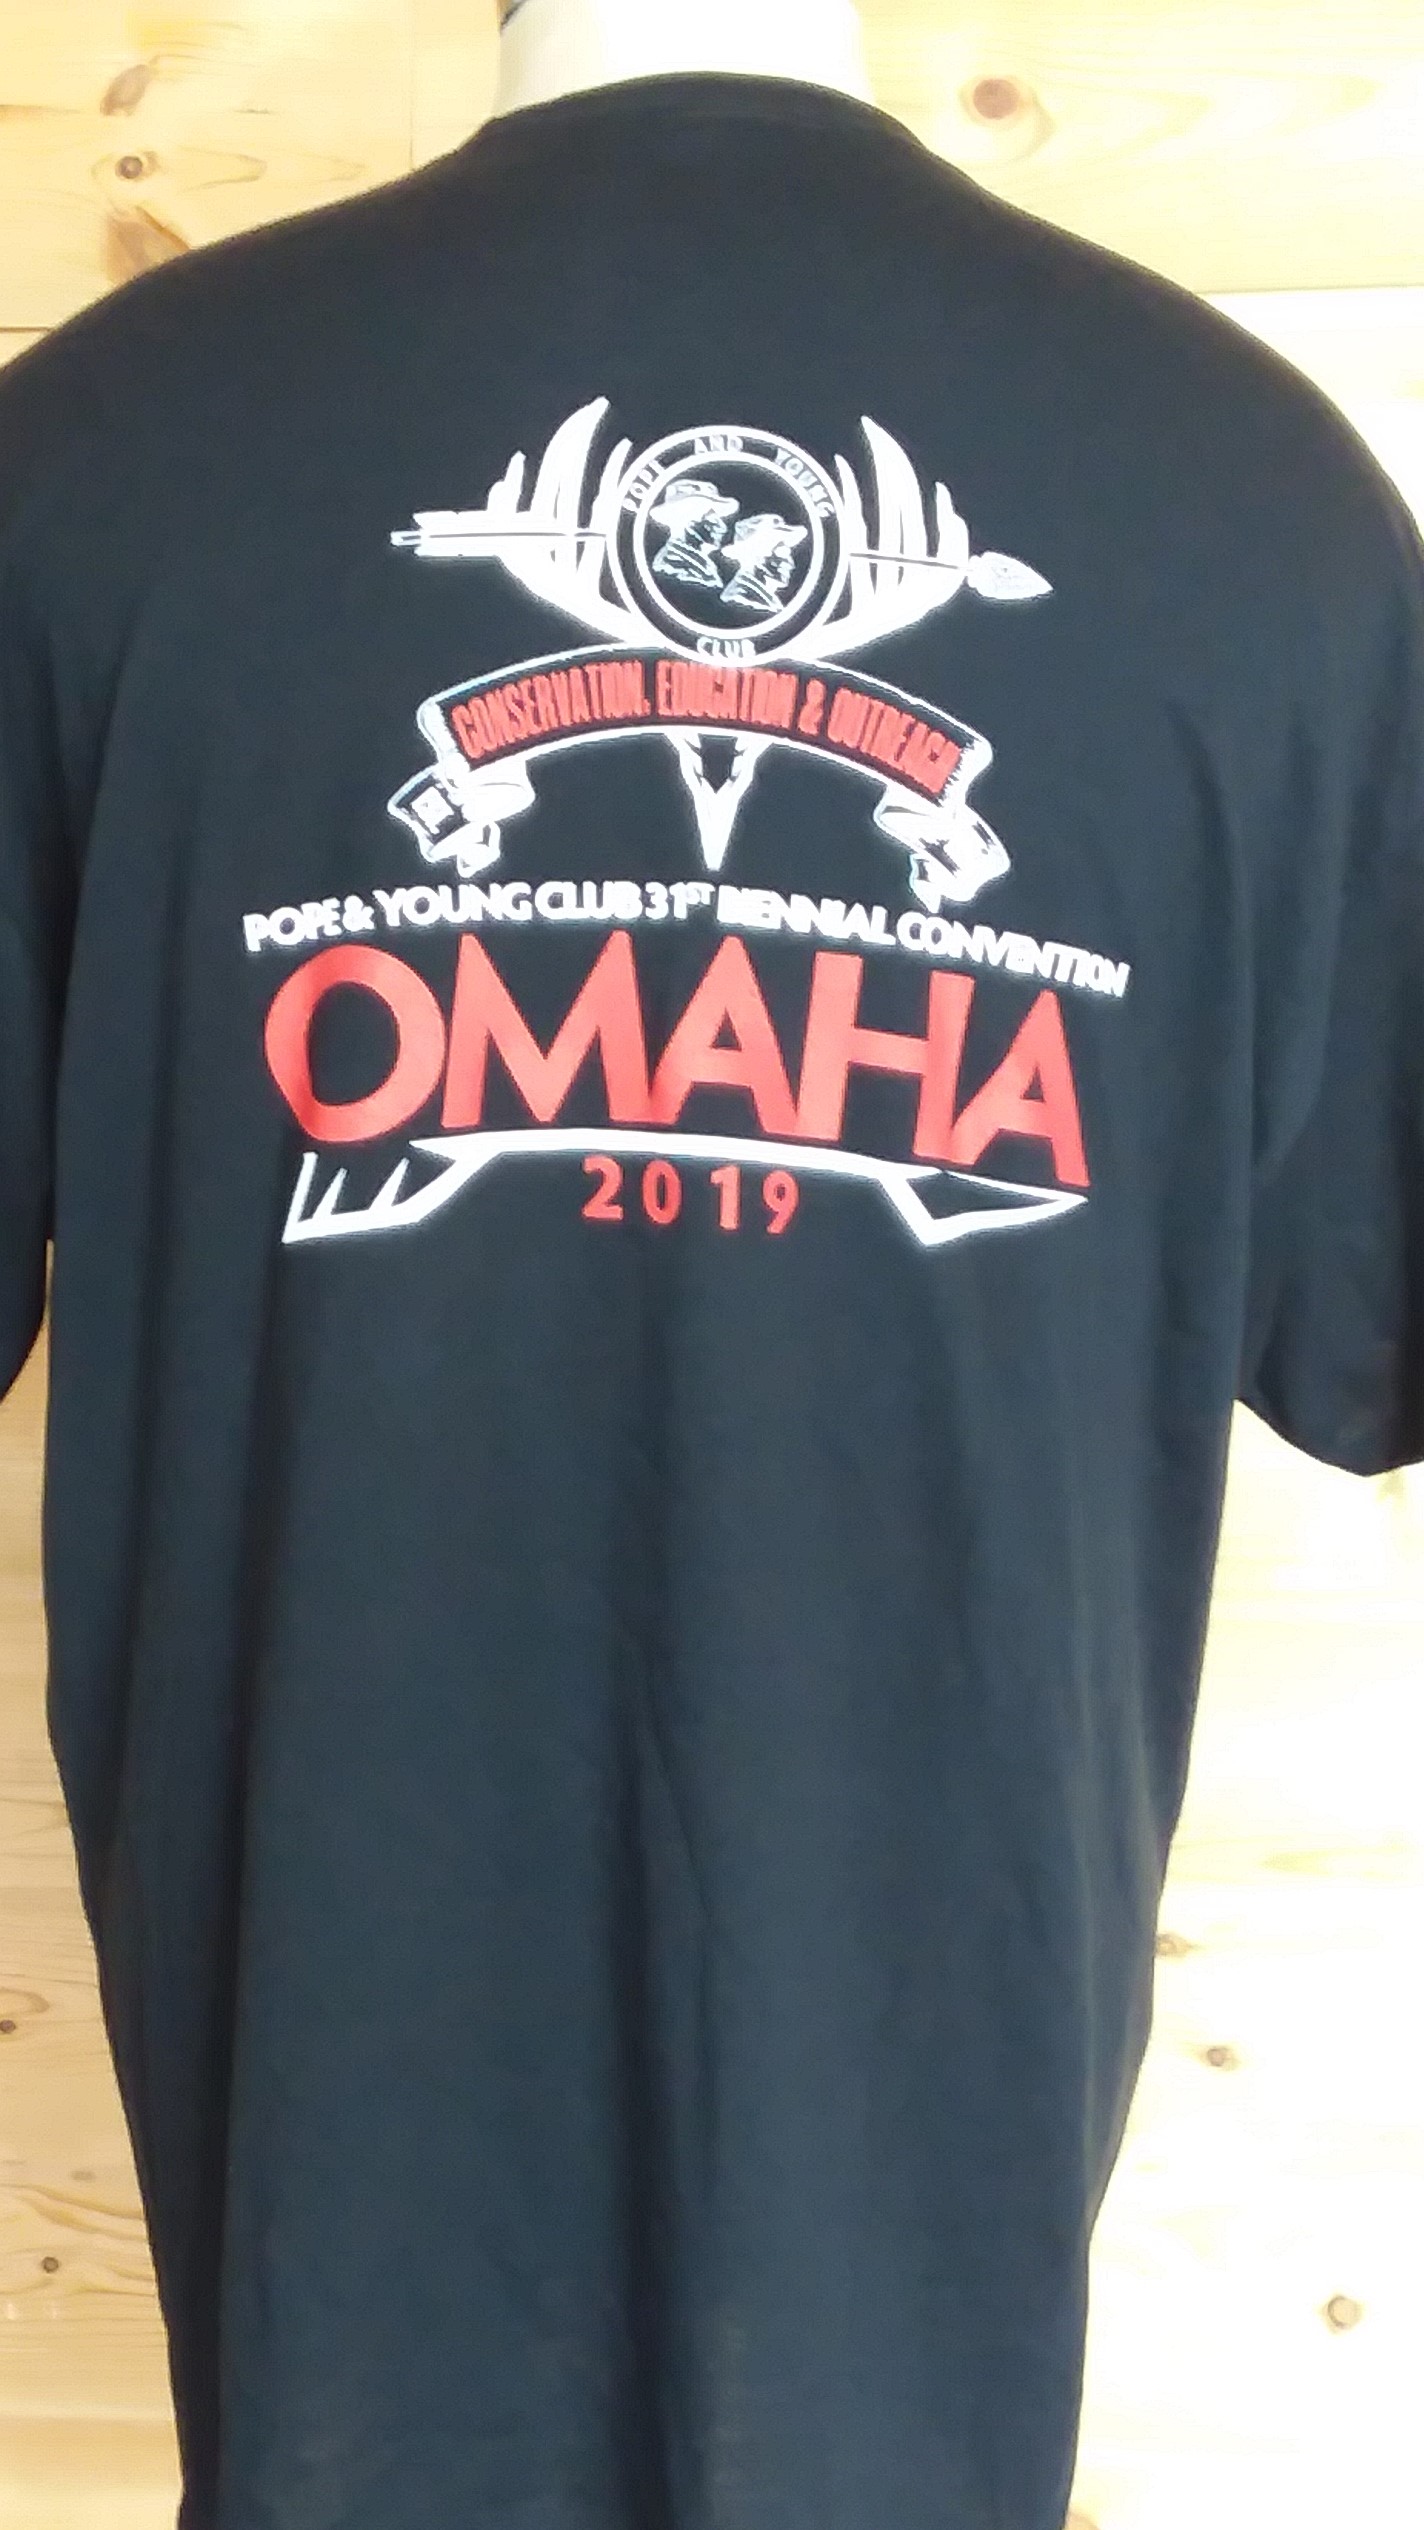 
Pope & Young 2019 Omaha Convention T-Shirt